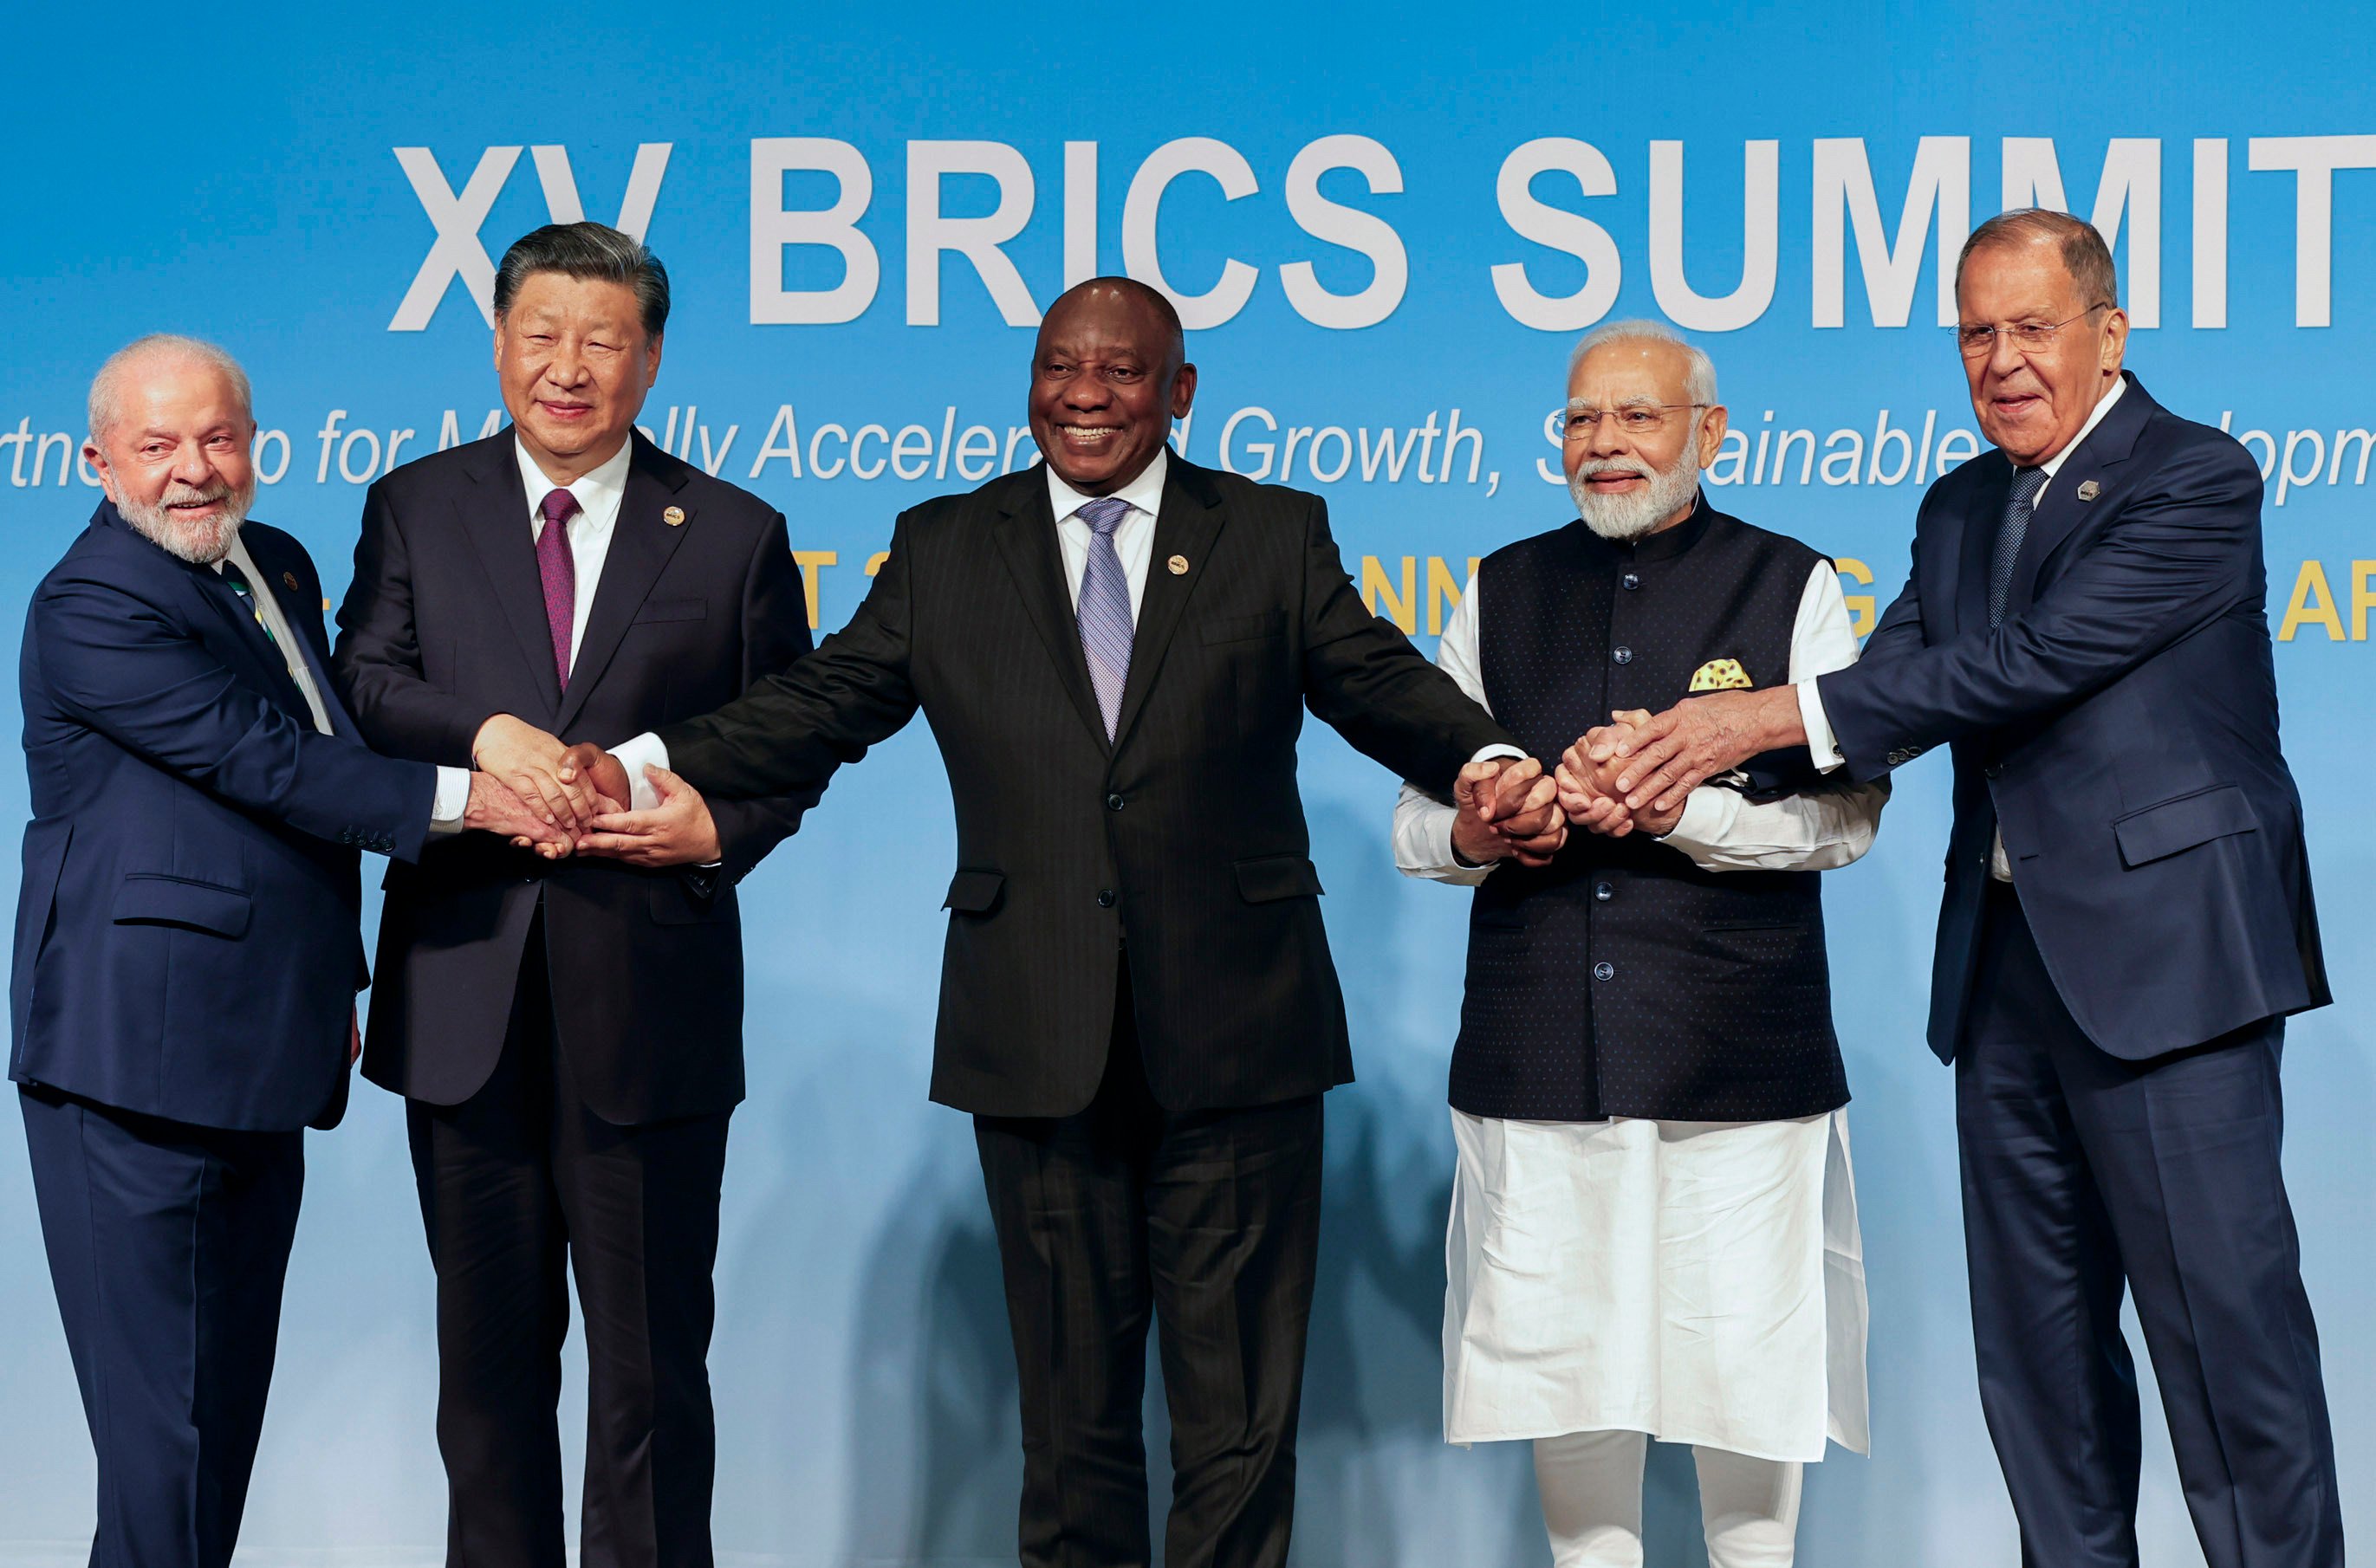 From the left, Brazilian President Luiz Inacio Lula da Silva, Chinese President Xi Jinping, South African President Cyril Ramaphosa, Indian Prime Minister Narendra Modi and Russian Foreign Minister Sergei Lavrov pose for a group photo during the Brics Summit in Johannesburg, South Africa, on August 23. Photo: AP